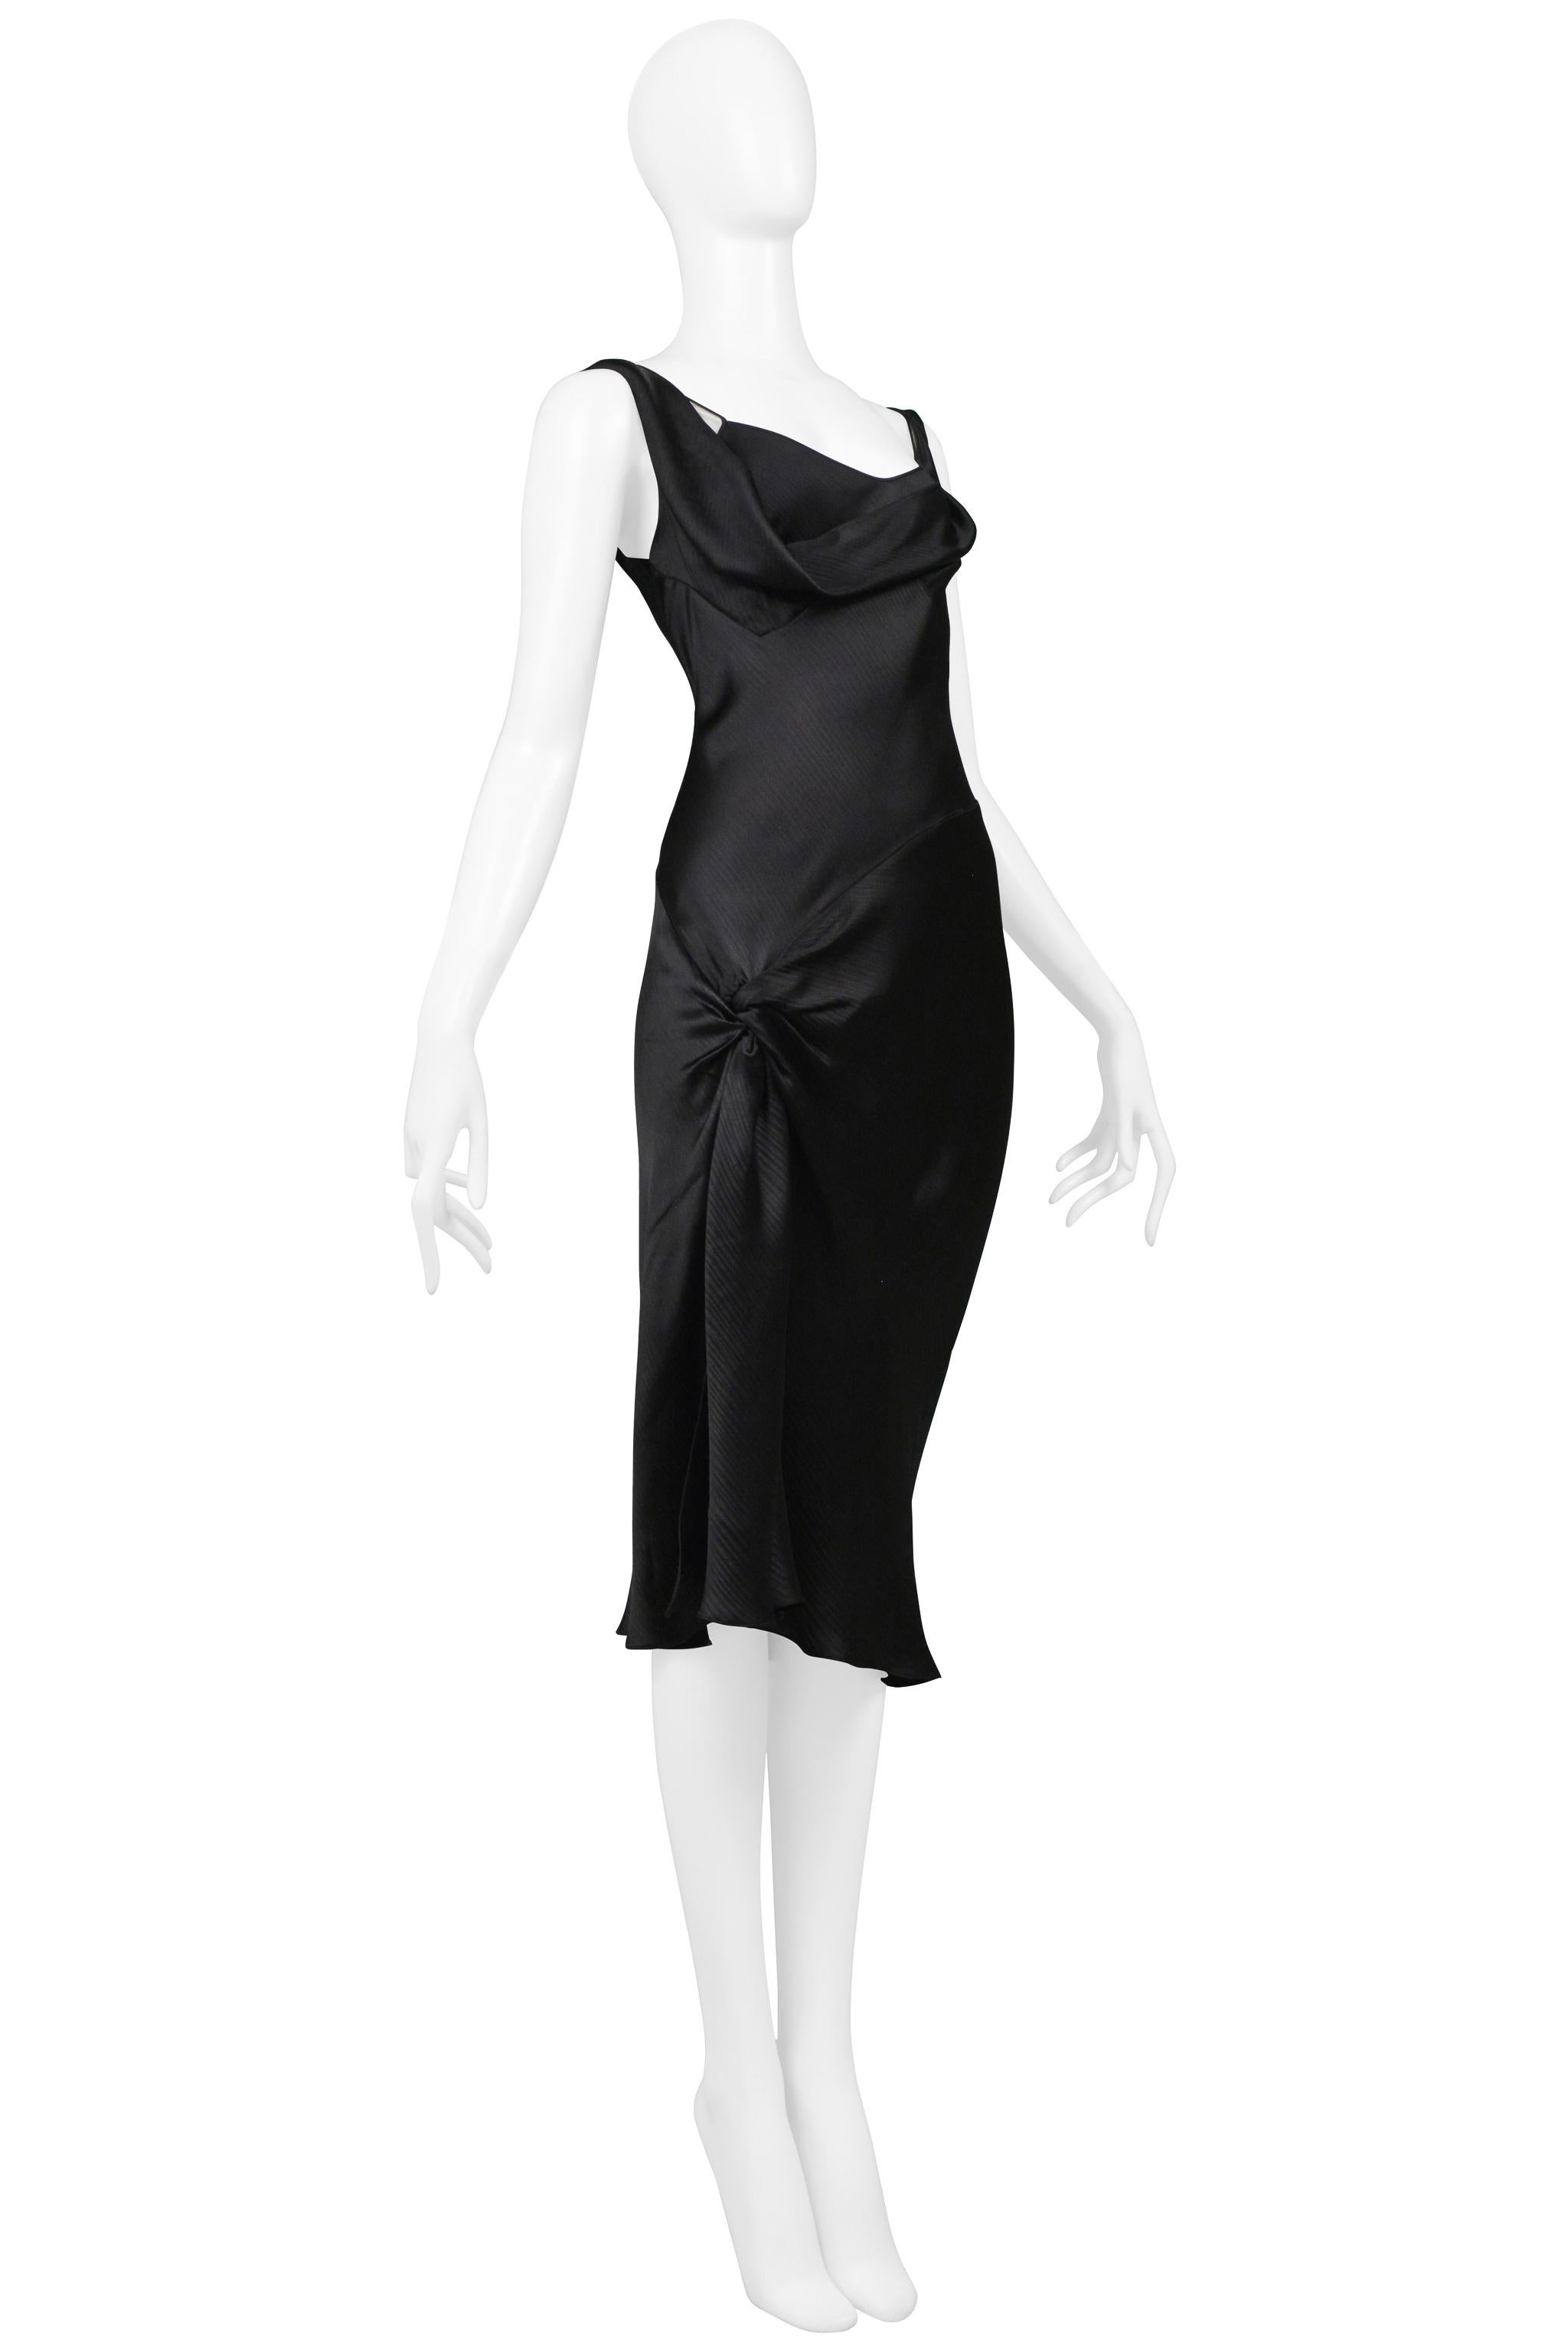 Stunning John Galliano Black Satin Slip Dress with Hip Knot and Slit 1990s For Sale 2